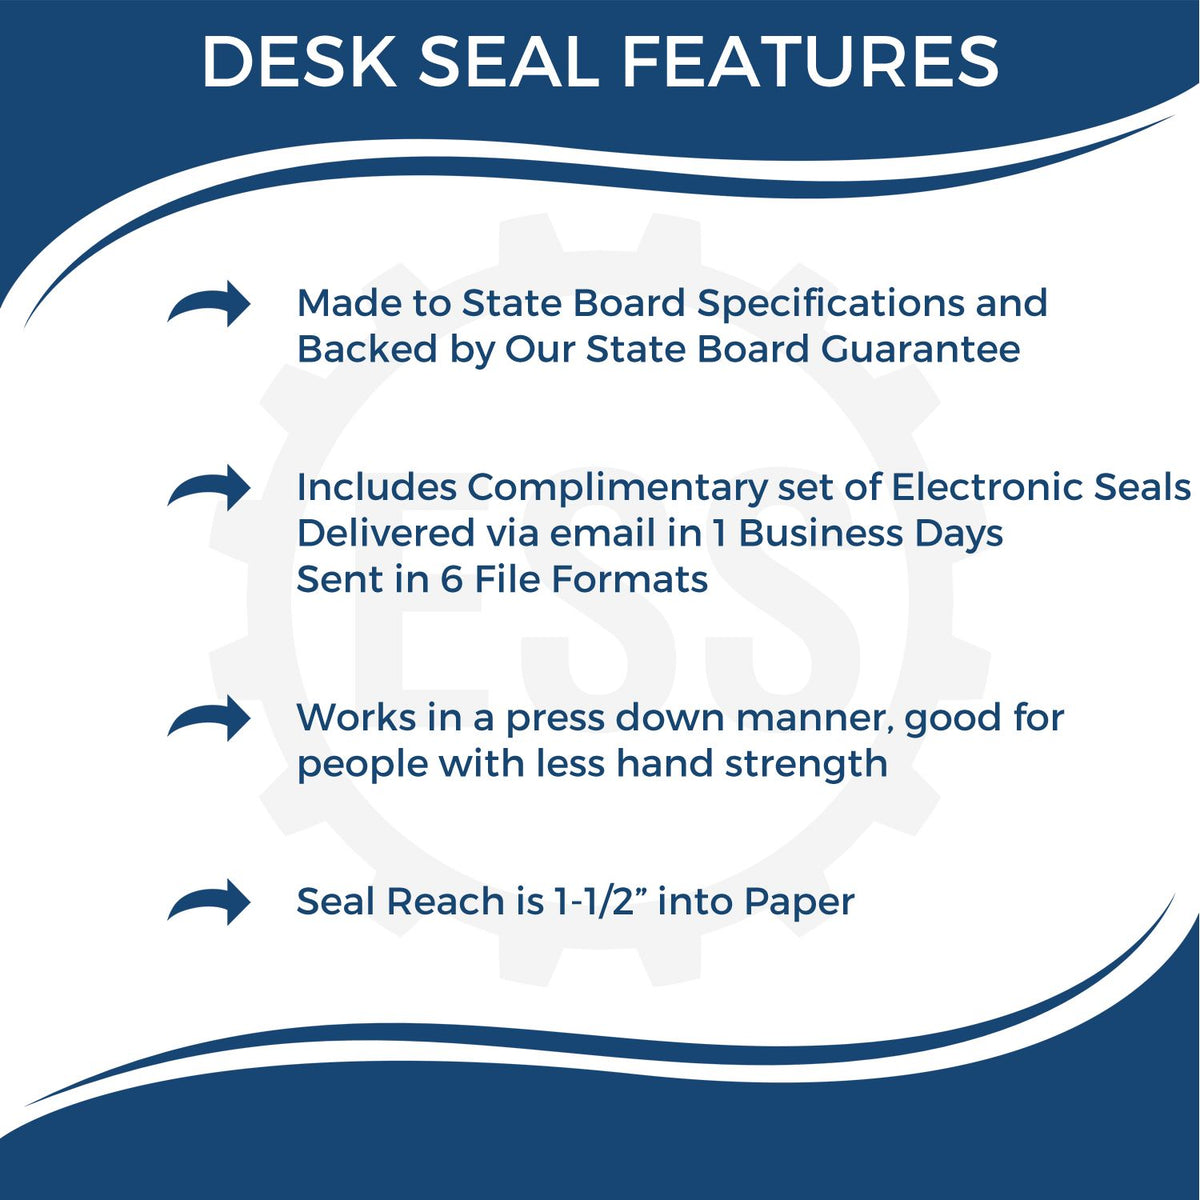 A picture of an infographic highlighting the selling points for the Kentucky Engineer Desk Seal